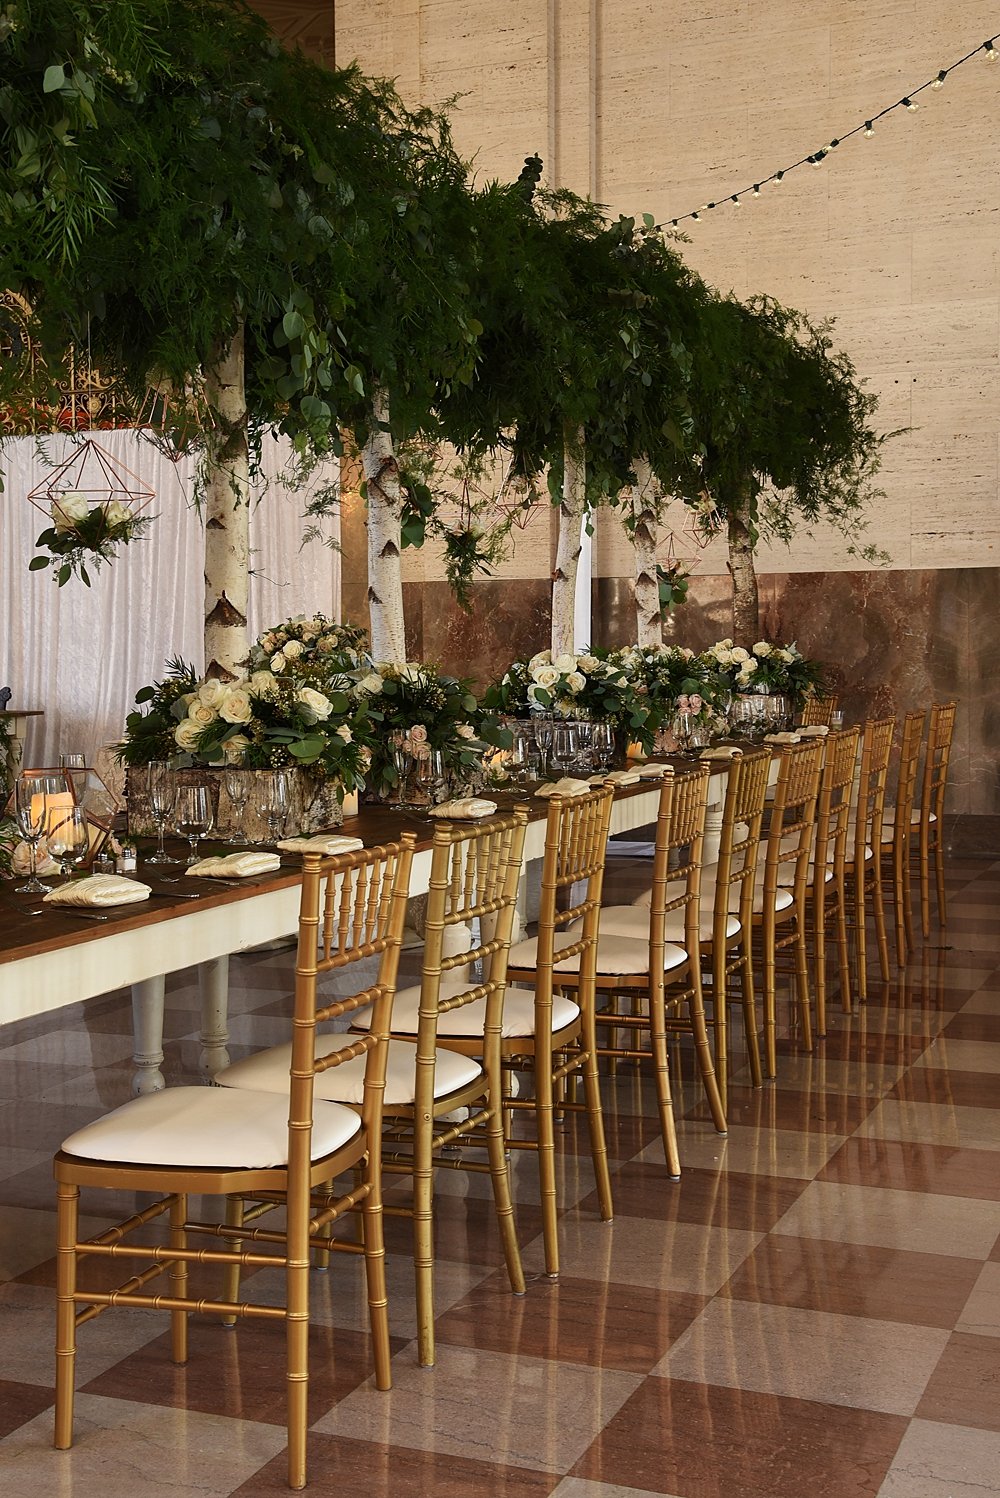 Lush Greenery Tablescape for a beautiful Indoor Garden | Vintage Garden Wedding at the Historic Alfred I DuPont Building in Miami, FL